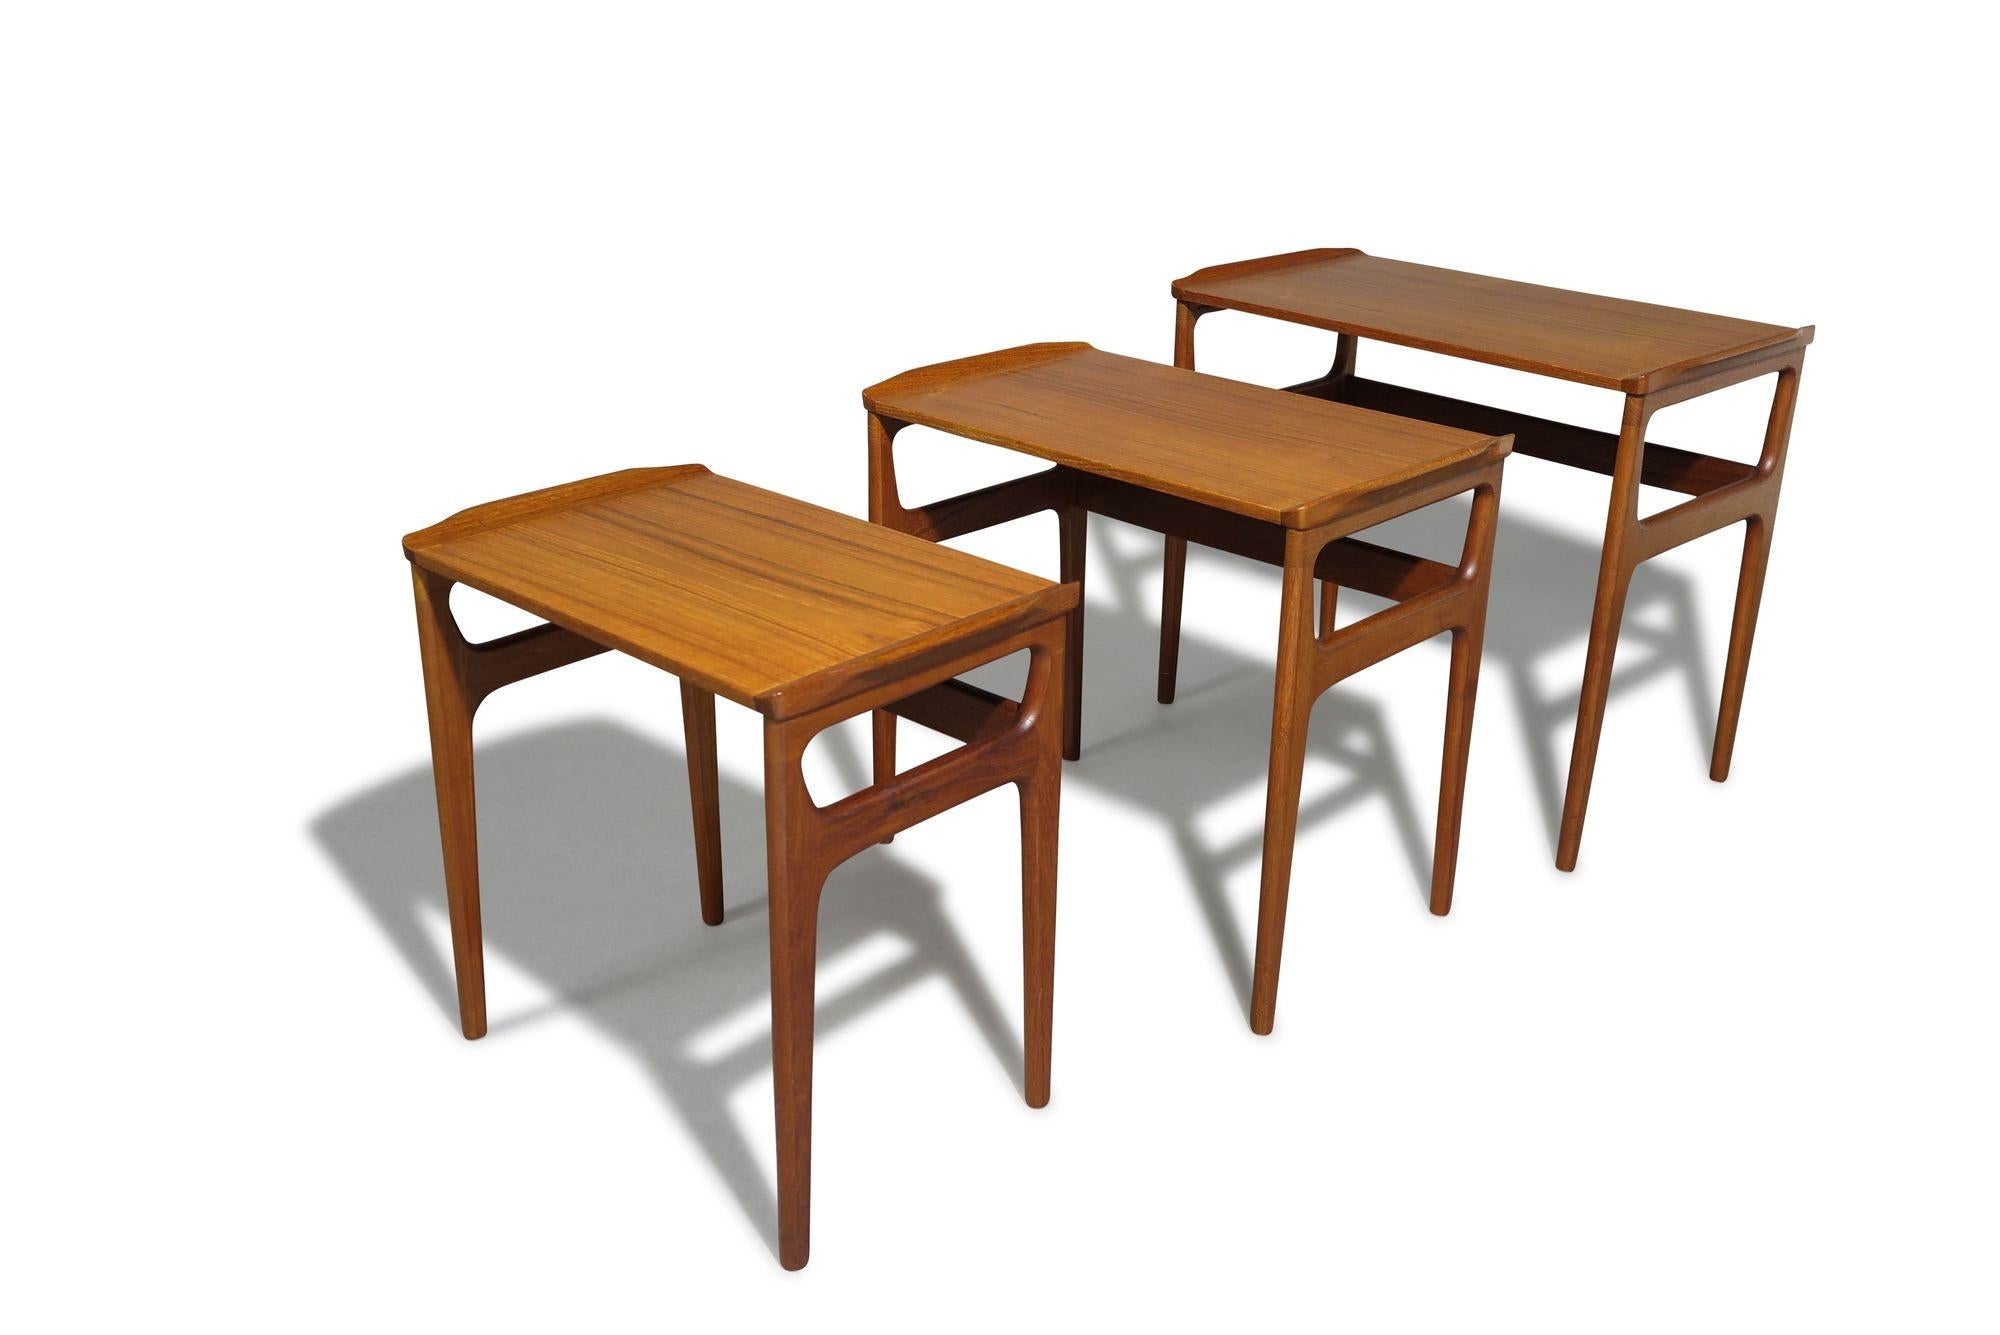 A set of three teak nesting tables designed by Erling Torvits, Denmark. Crafted with book-matched teak surfaces atop solid teak tapered legs. Finely restored with a hand-rubbed natural oil finish, they are in excellent condition, showing only minor